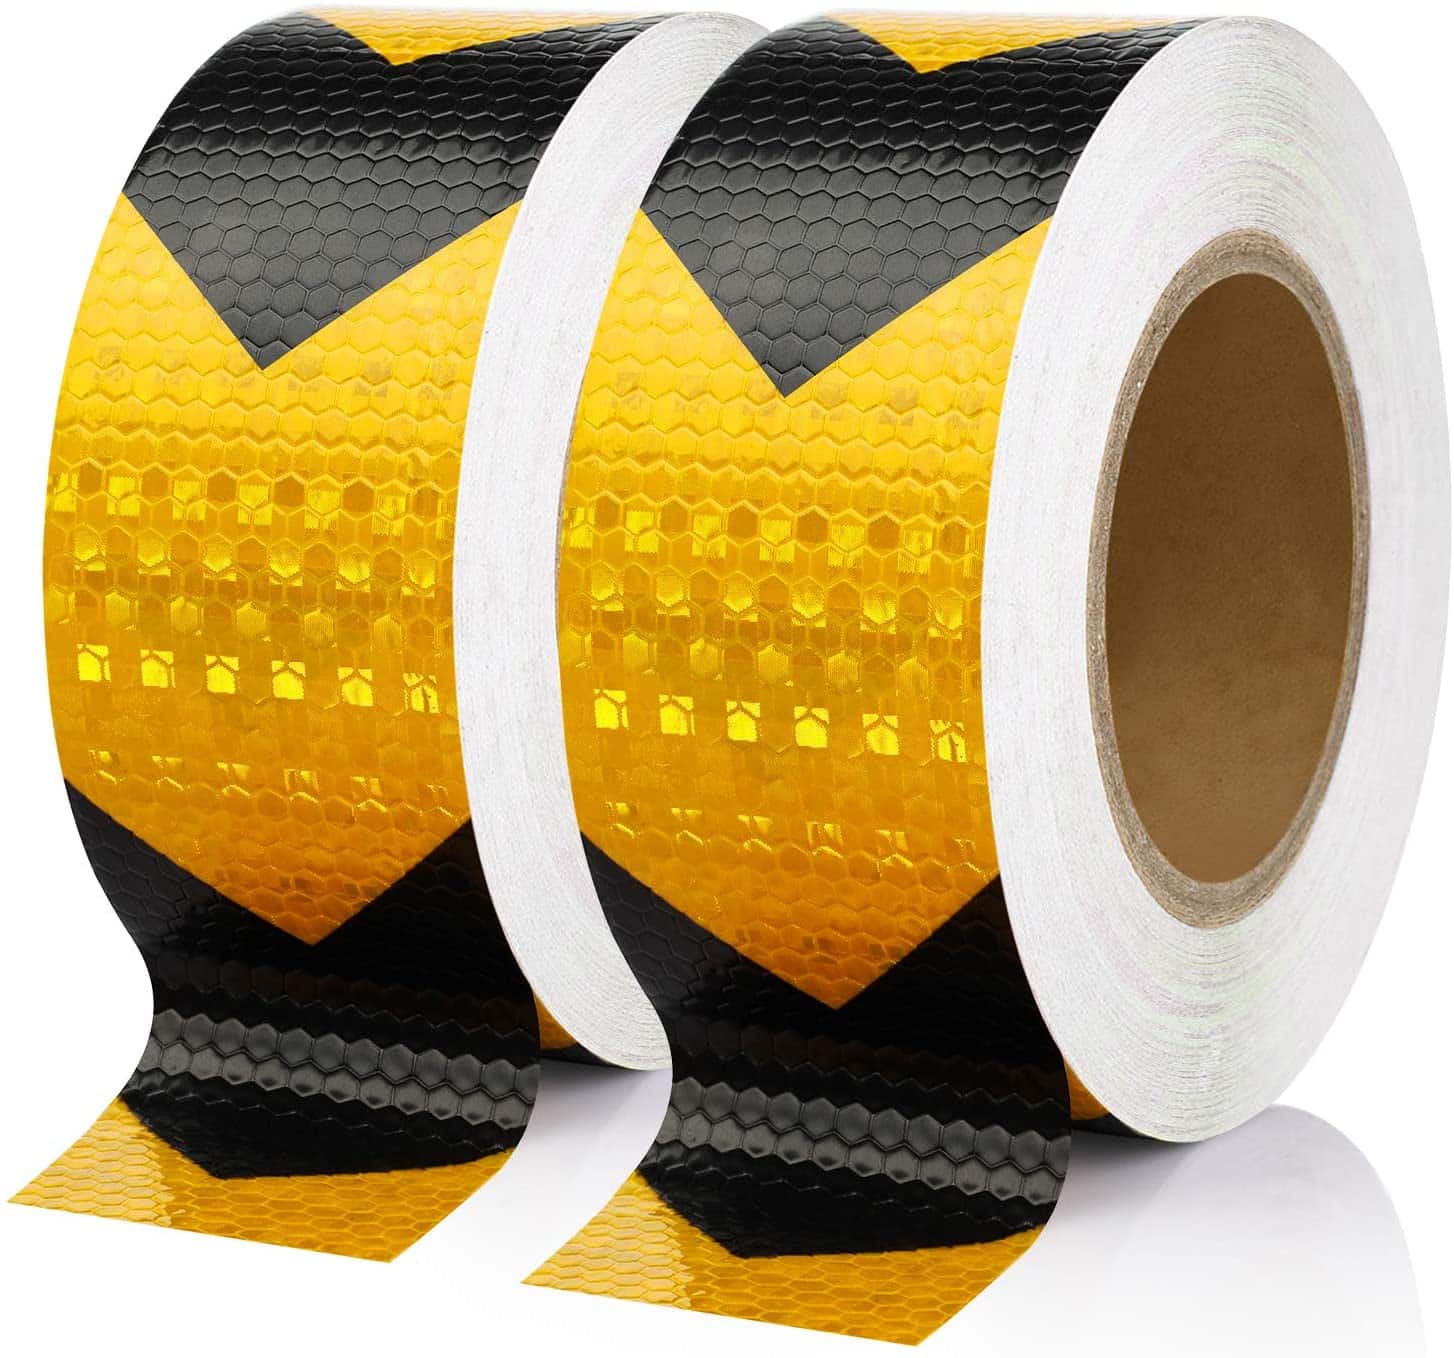 Top 10 Best Reflective Tapes in 2023 Reviews | Buyer’s Guide